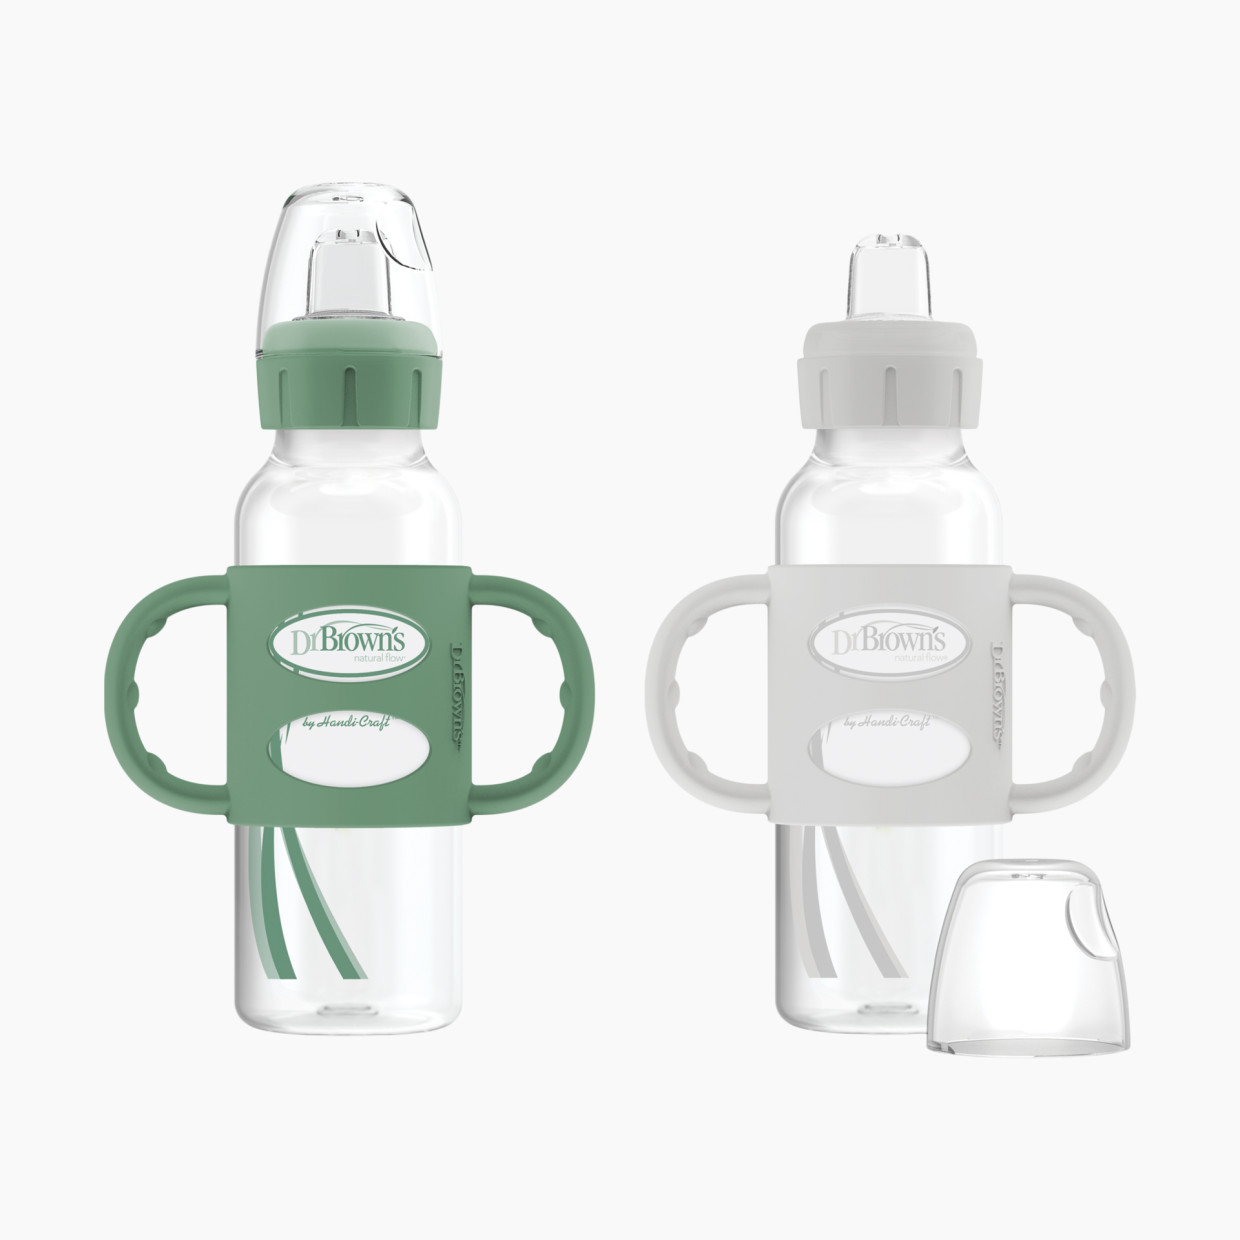 Dr. Brown's Natural Flow® Narrow Baby Bottle Silicone Nipple, 2-Pack